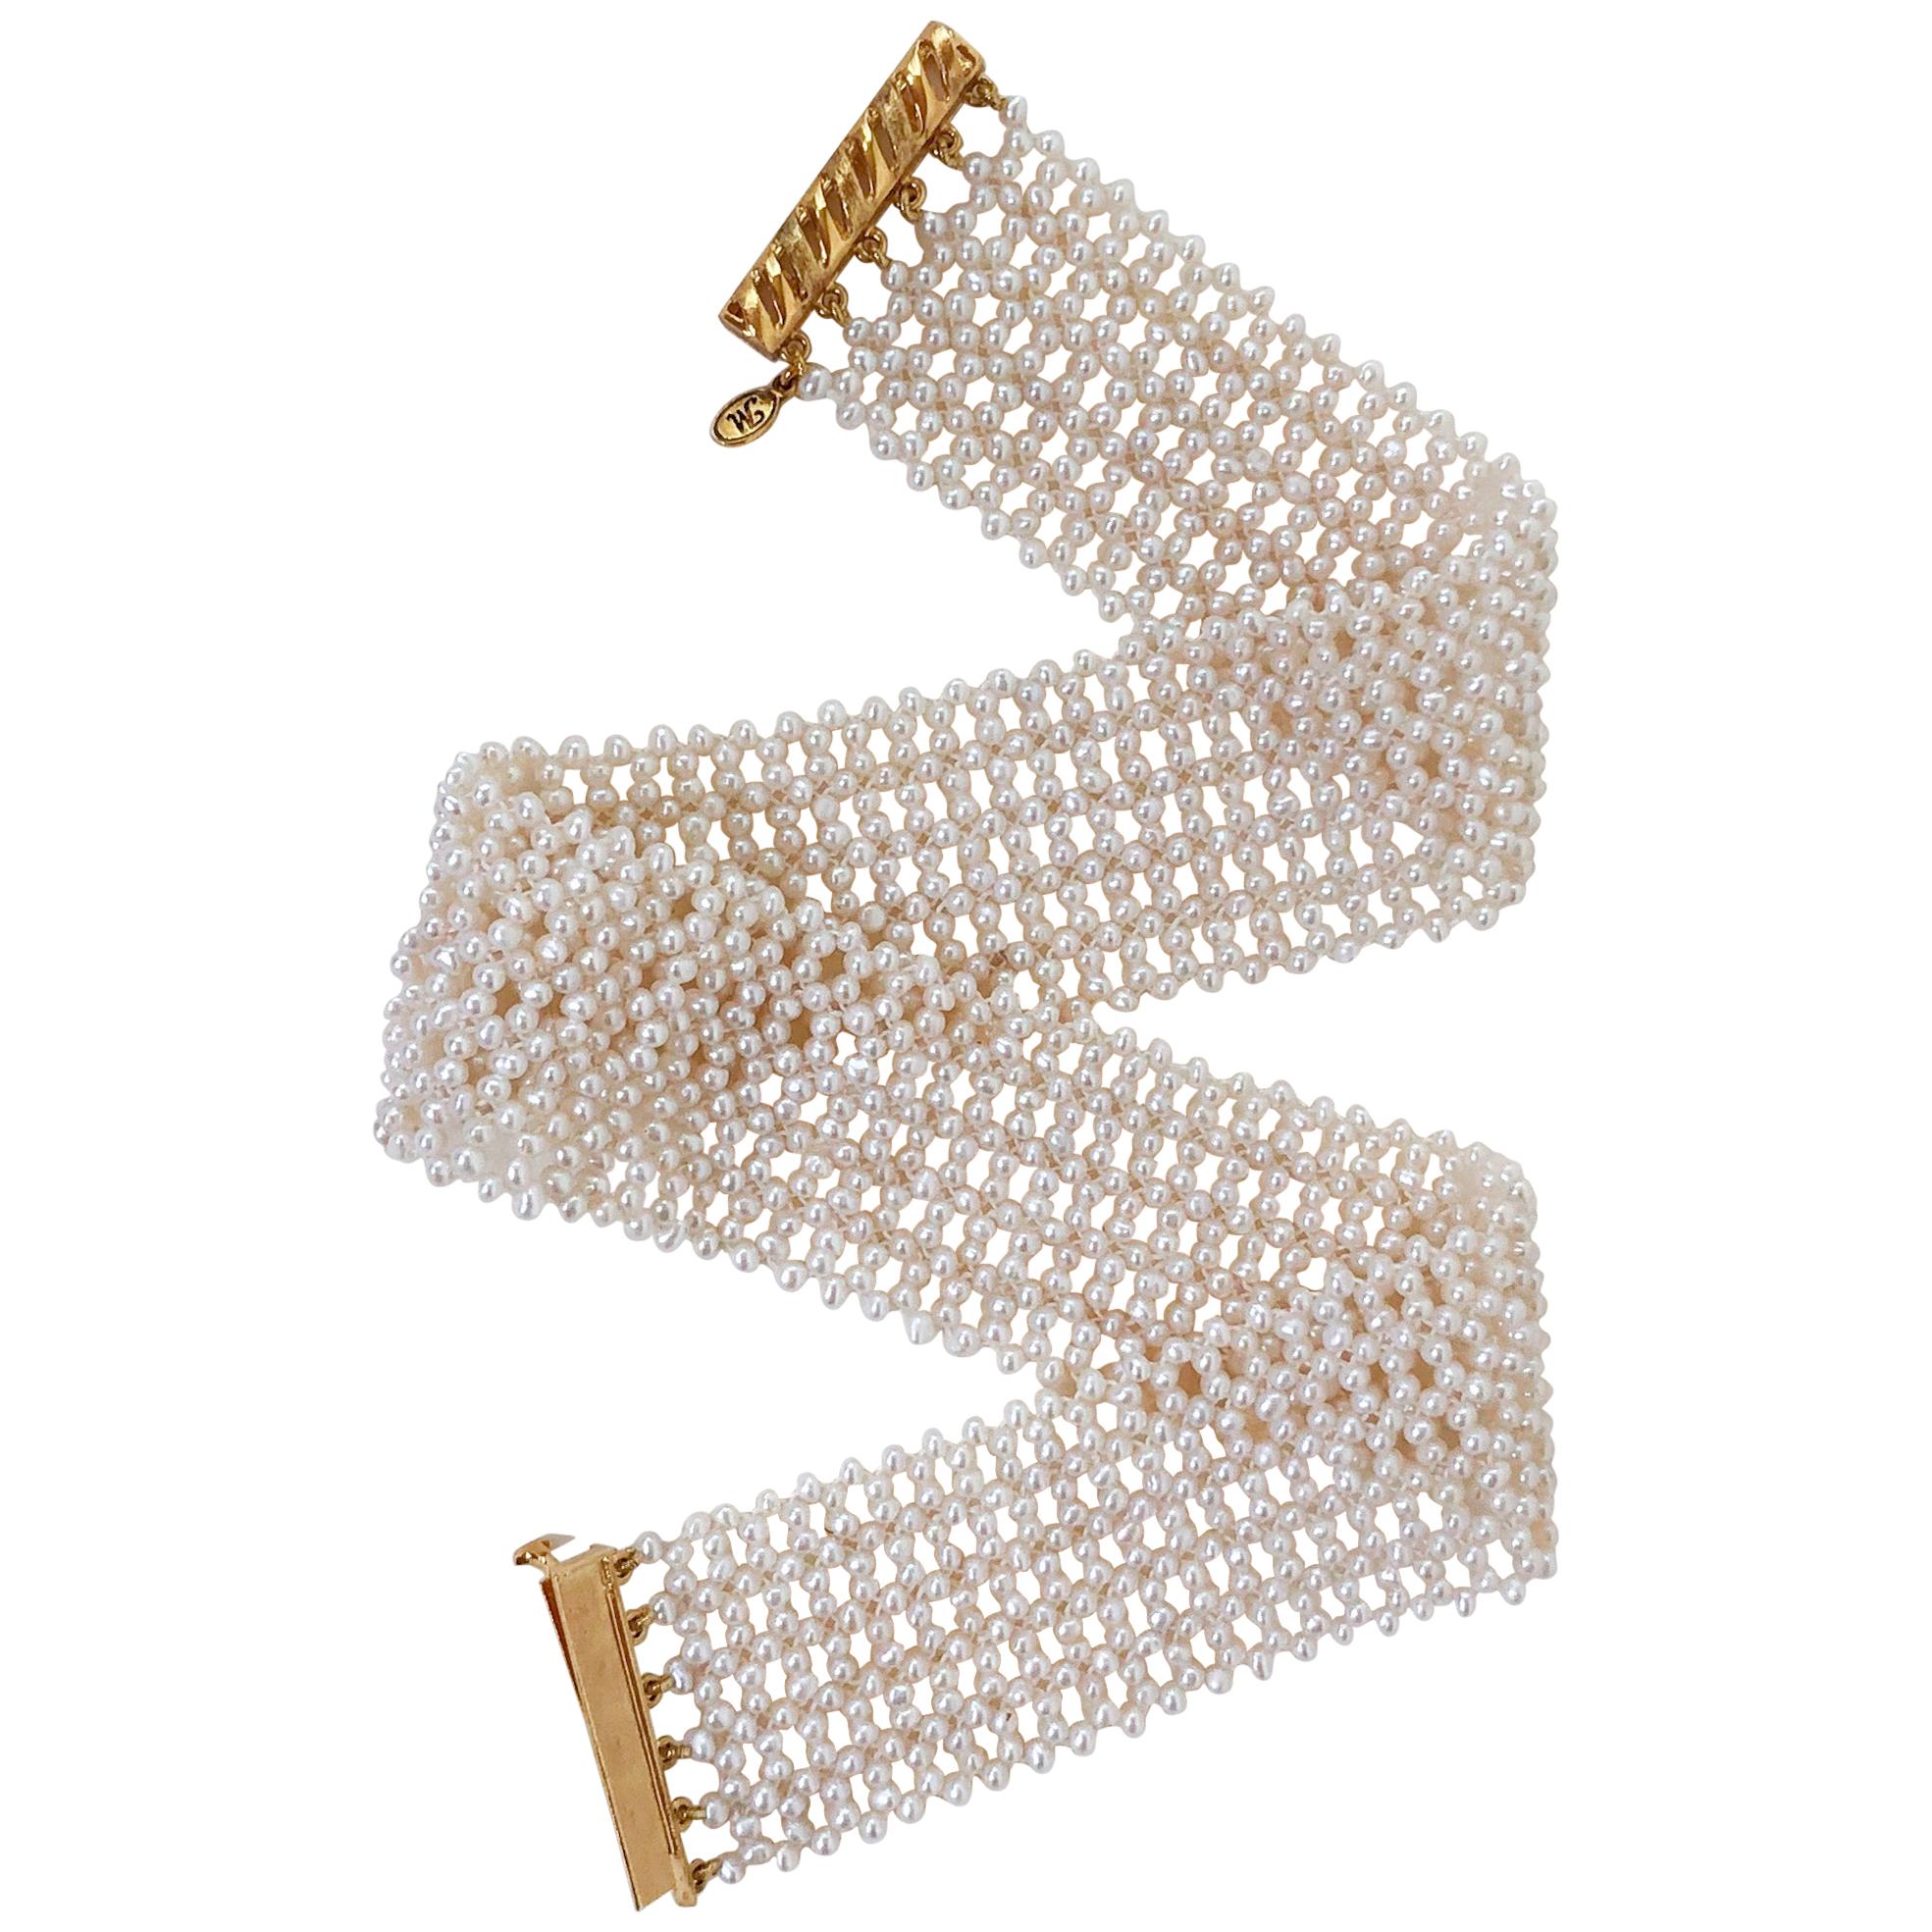 Marina J Intricately Woven White Seed Pearl Choker with Gold plated Silver Clasp